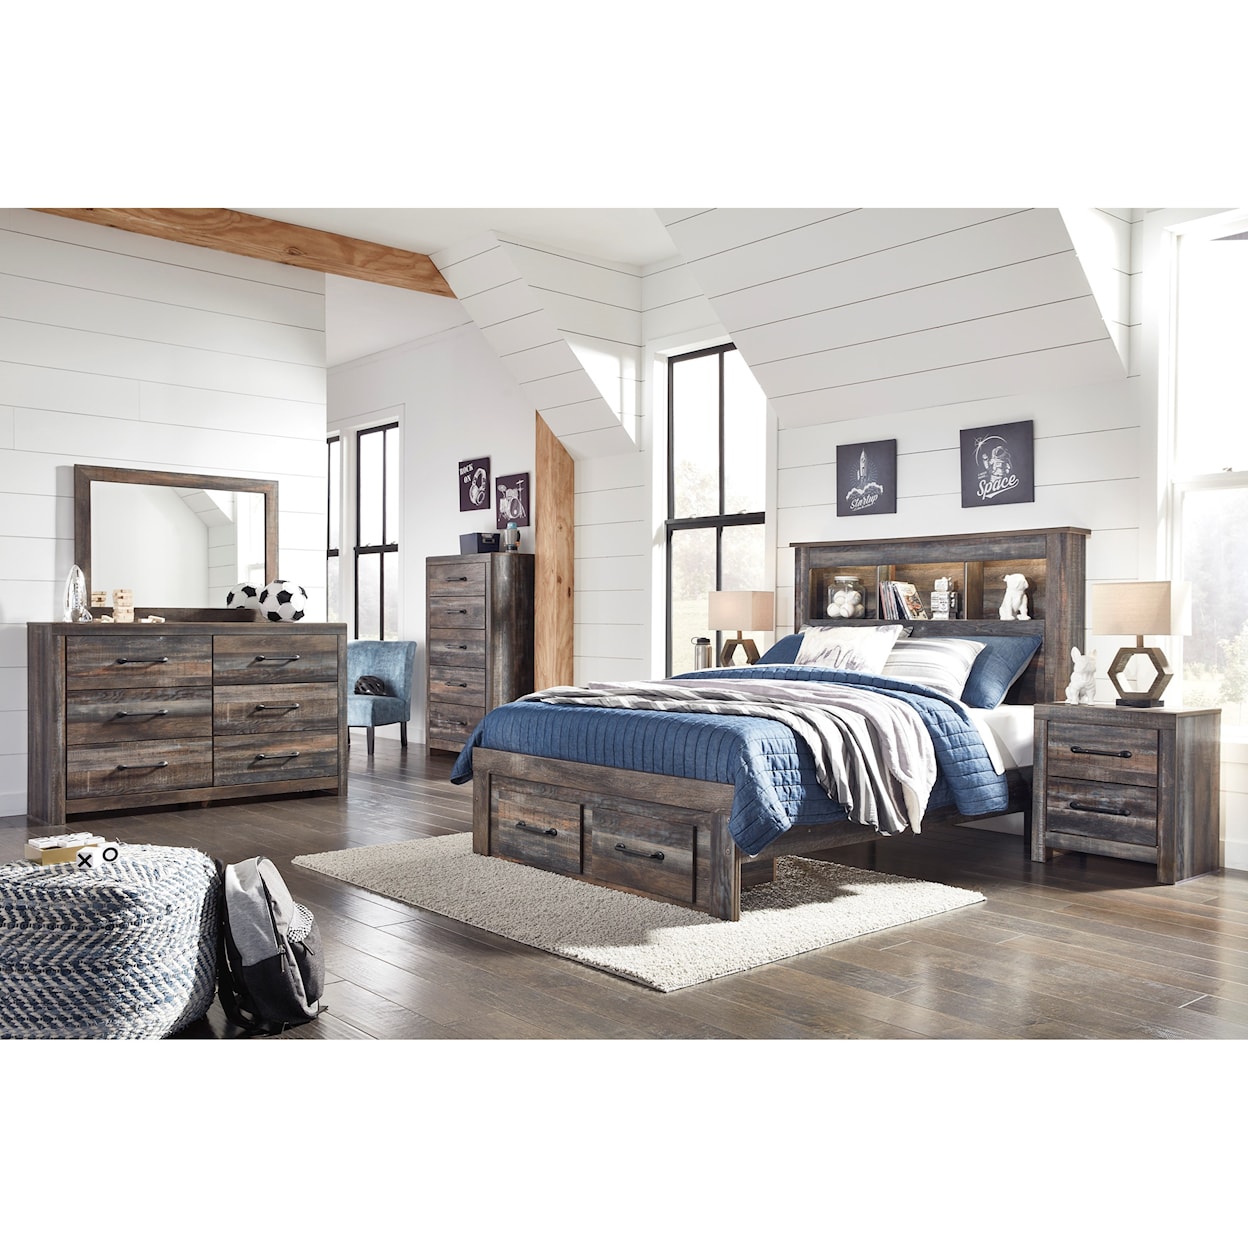 Signature Design by Ashley Drystan 7pc Full Bedroom Group